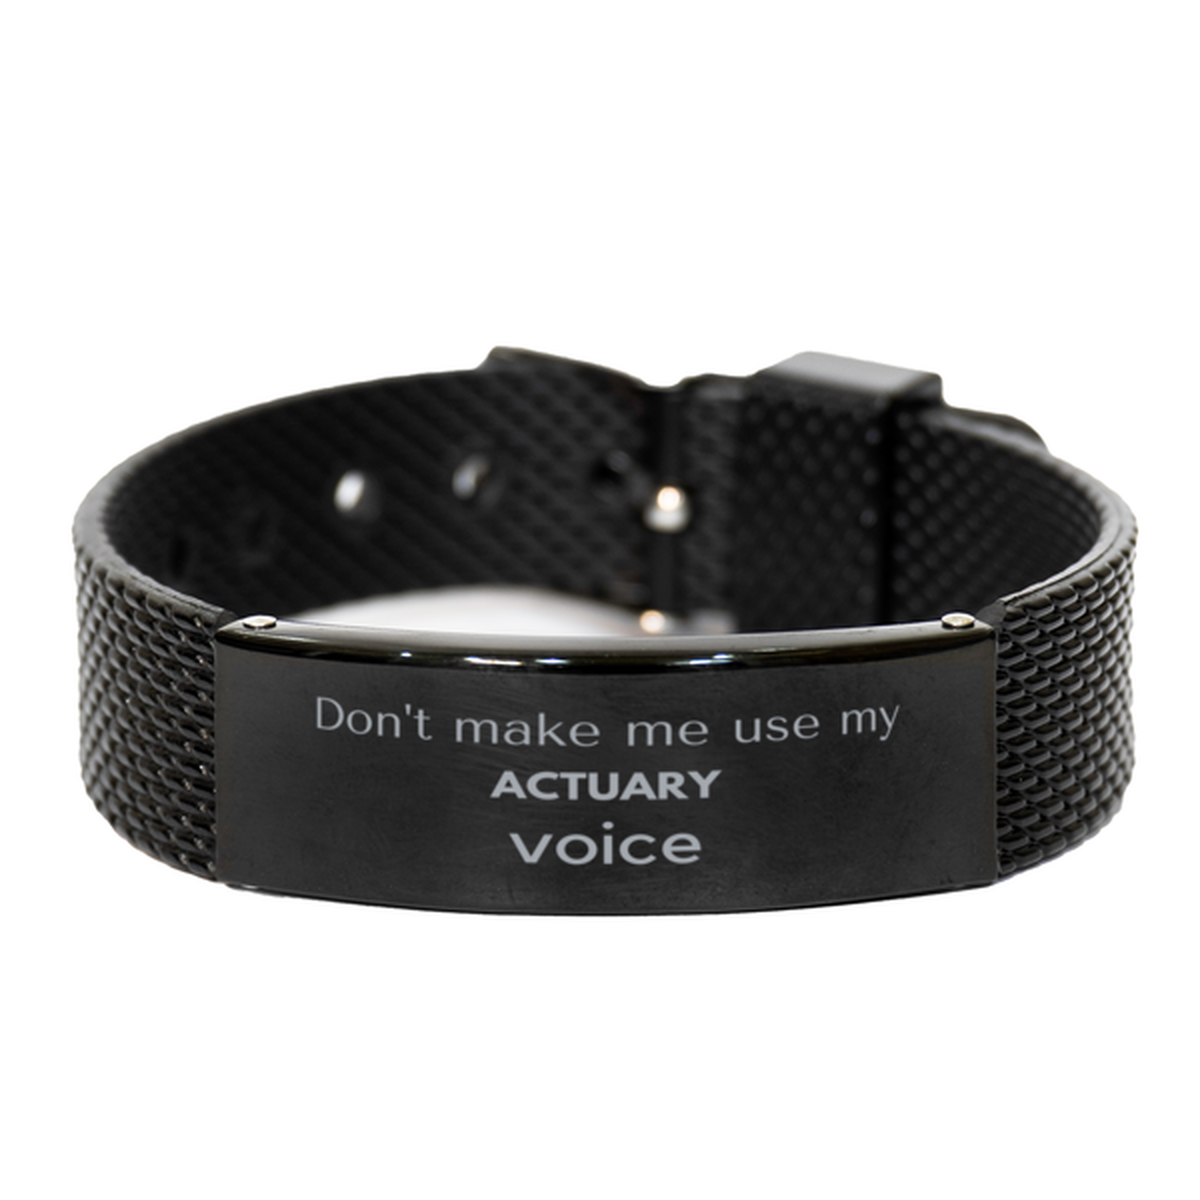 Don't make me use my Actuary voice, Sarcasm Actuary Gifts, Christmas Actuary Black Shark Mesh Bracelet Birthday Unique Gifts For Actuary Coworkers, Men, Women, Colleague, Friends